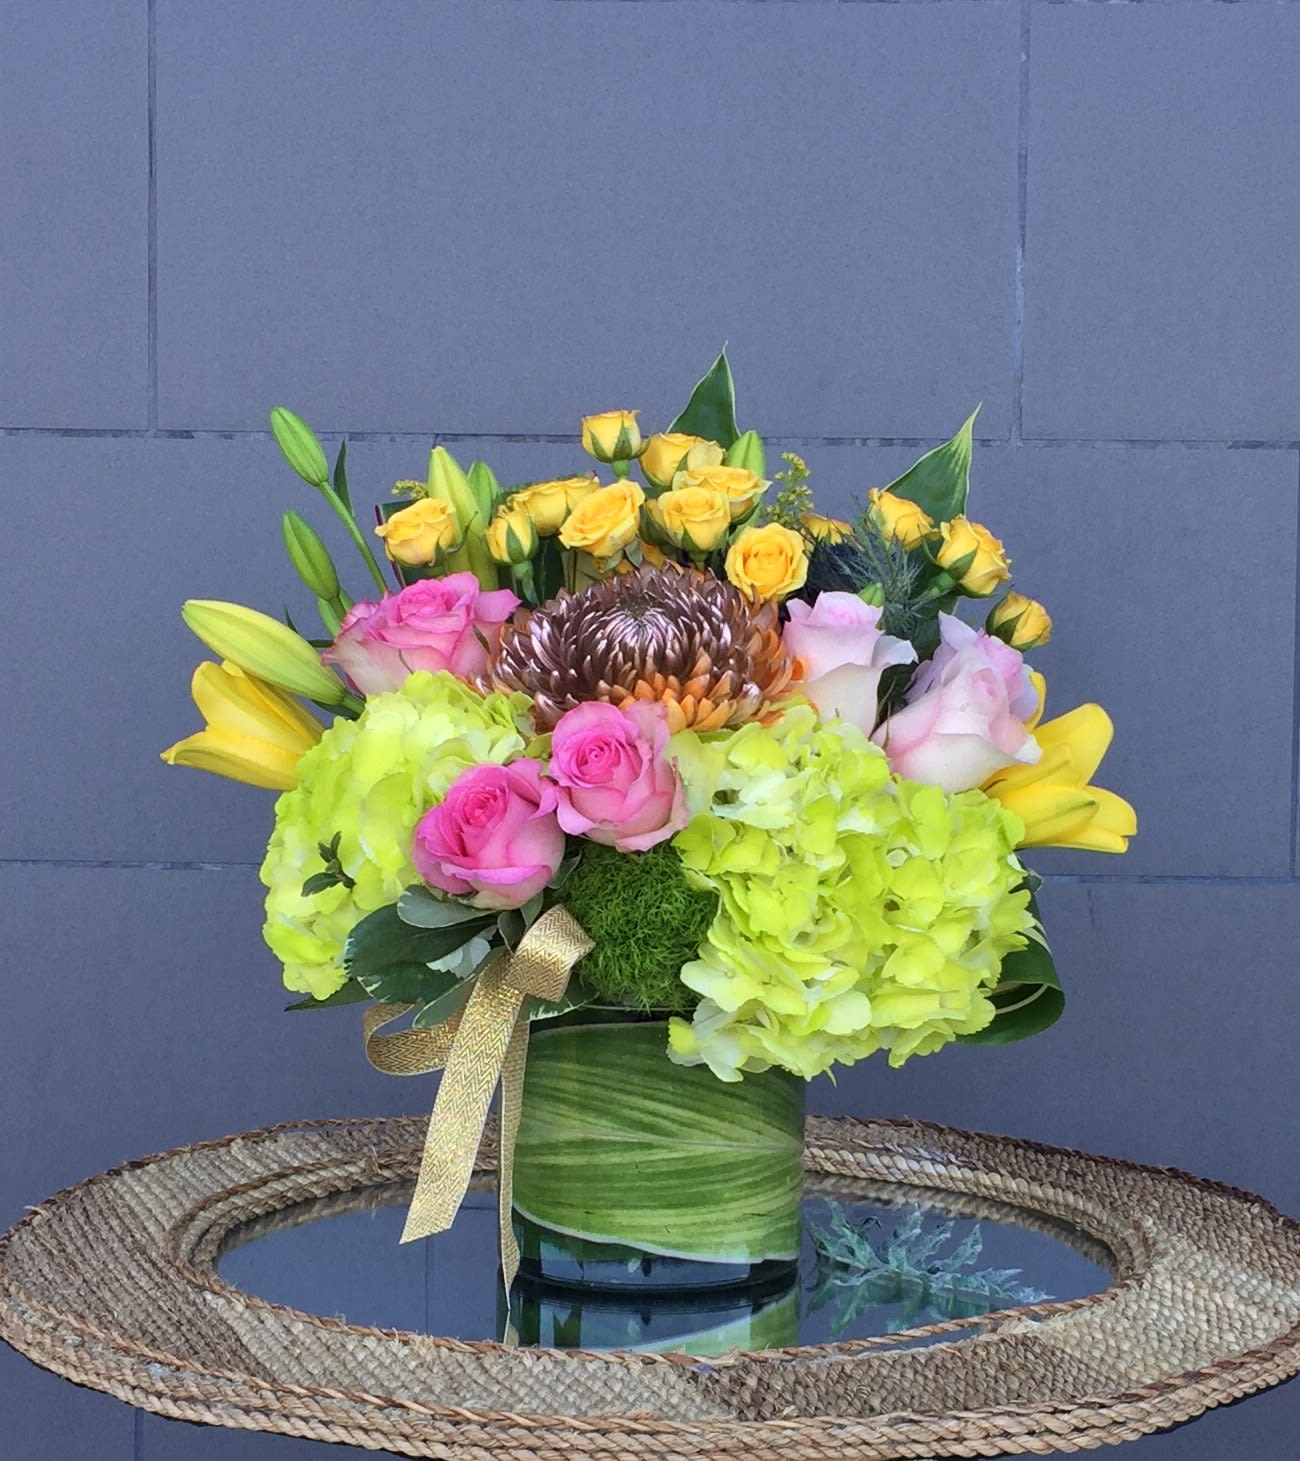 Sweet Spring - Beautiful design including rose, lily, hydrangea... and accents in a nice glass vase. STANDARD: FIRST PHOTO DELUXE: SECOND PHOTO